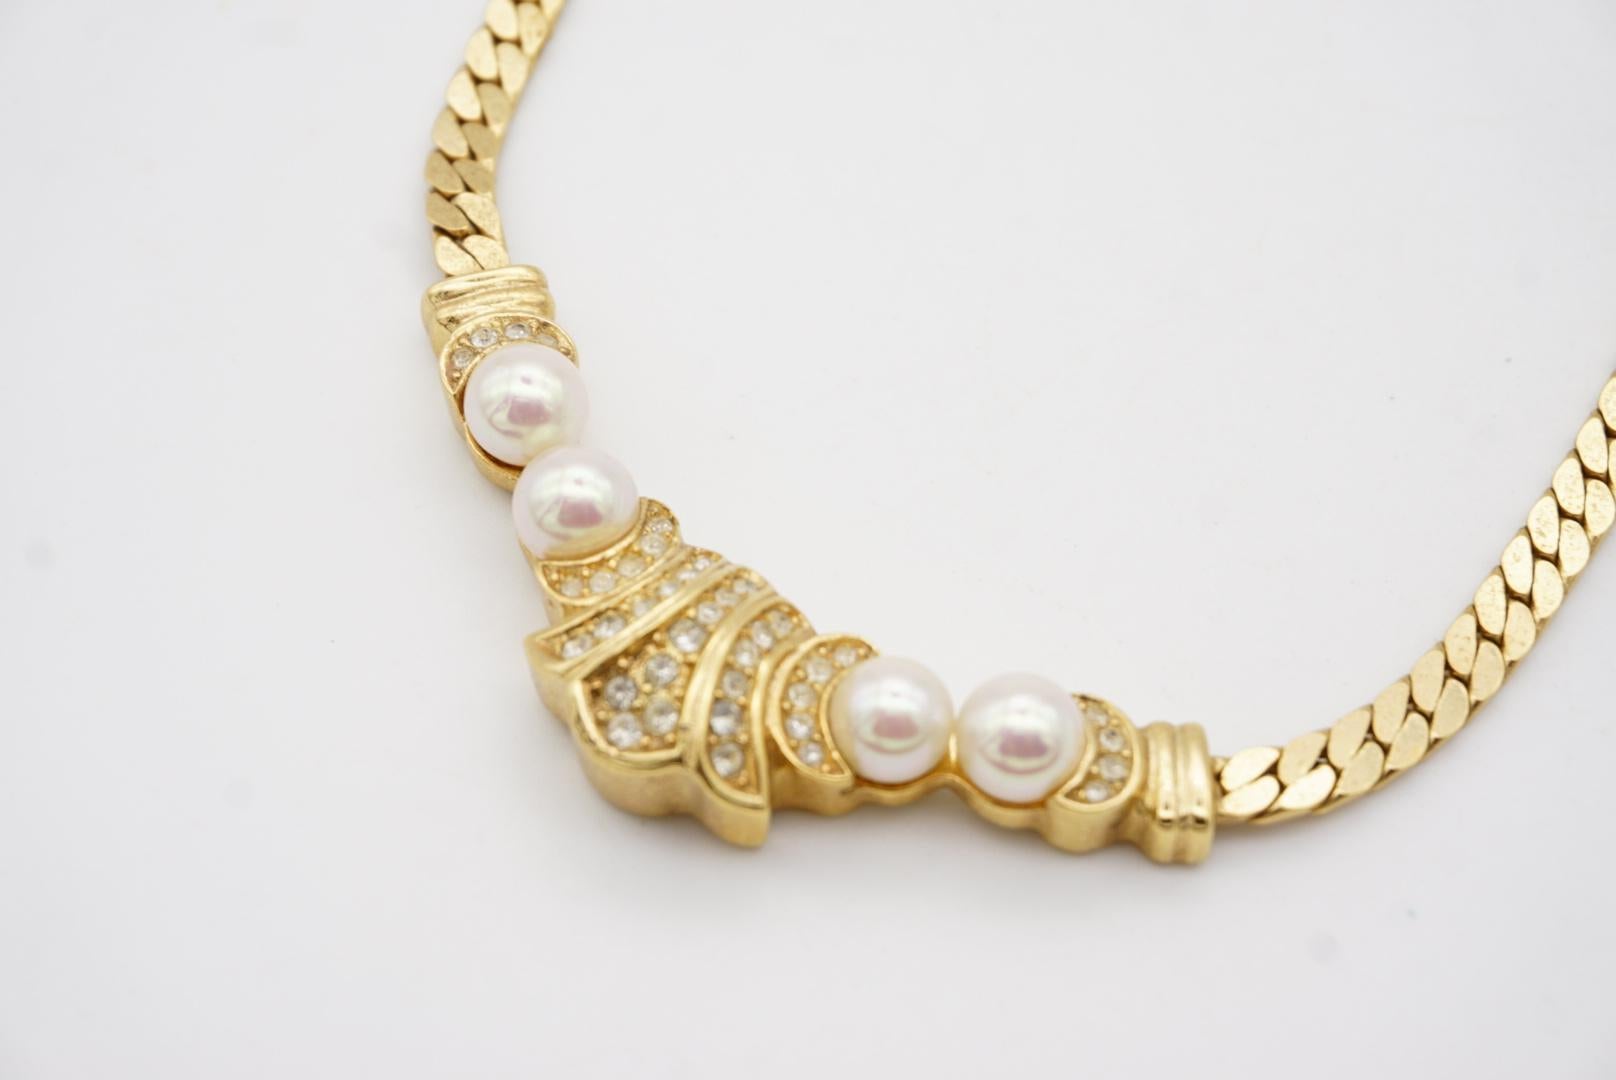 Christian Dior Vintage 1980s White Pearls Moon Fan Crystals Pendant Necklace For Sale 4